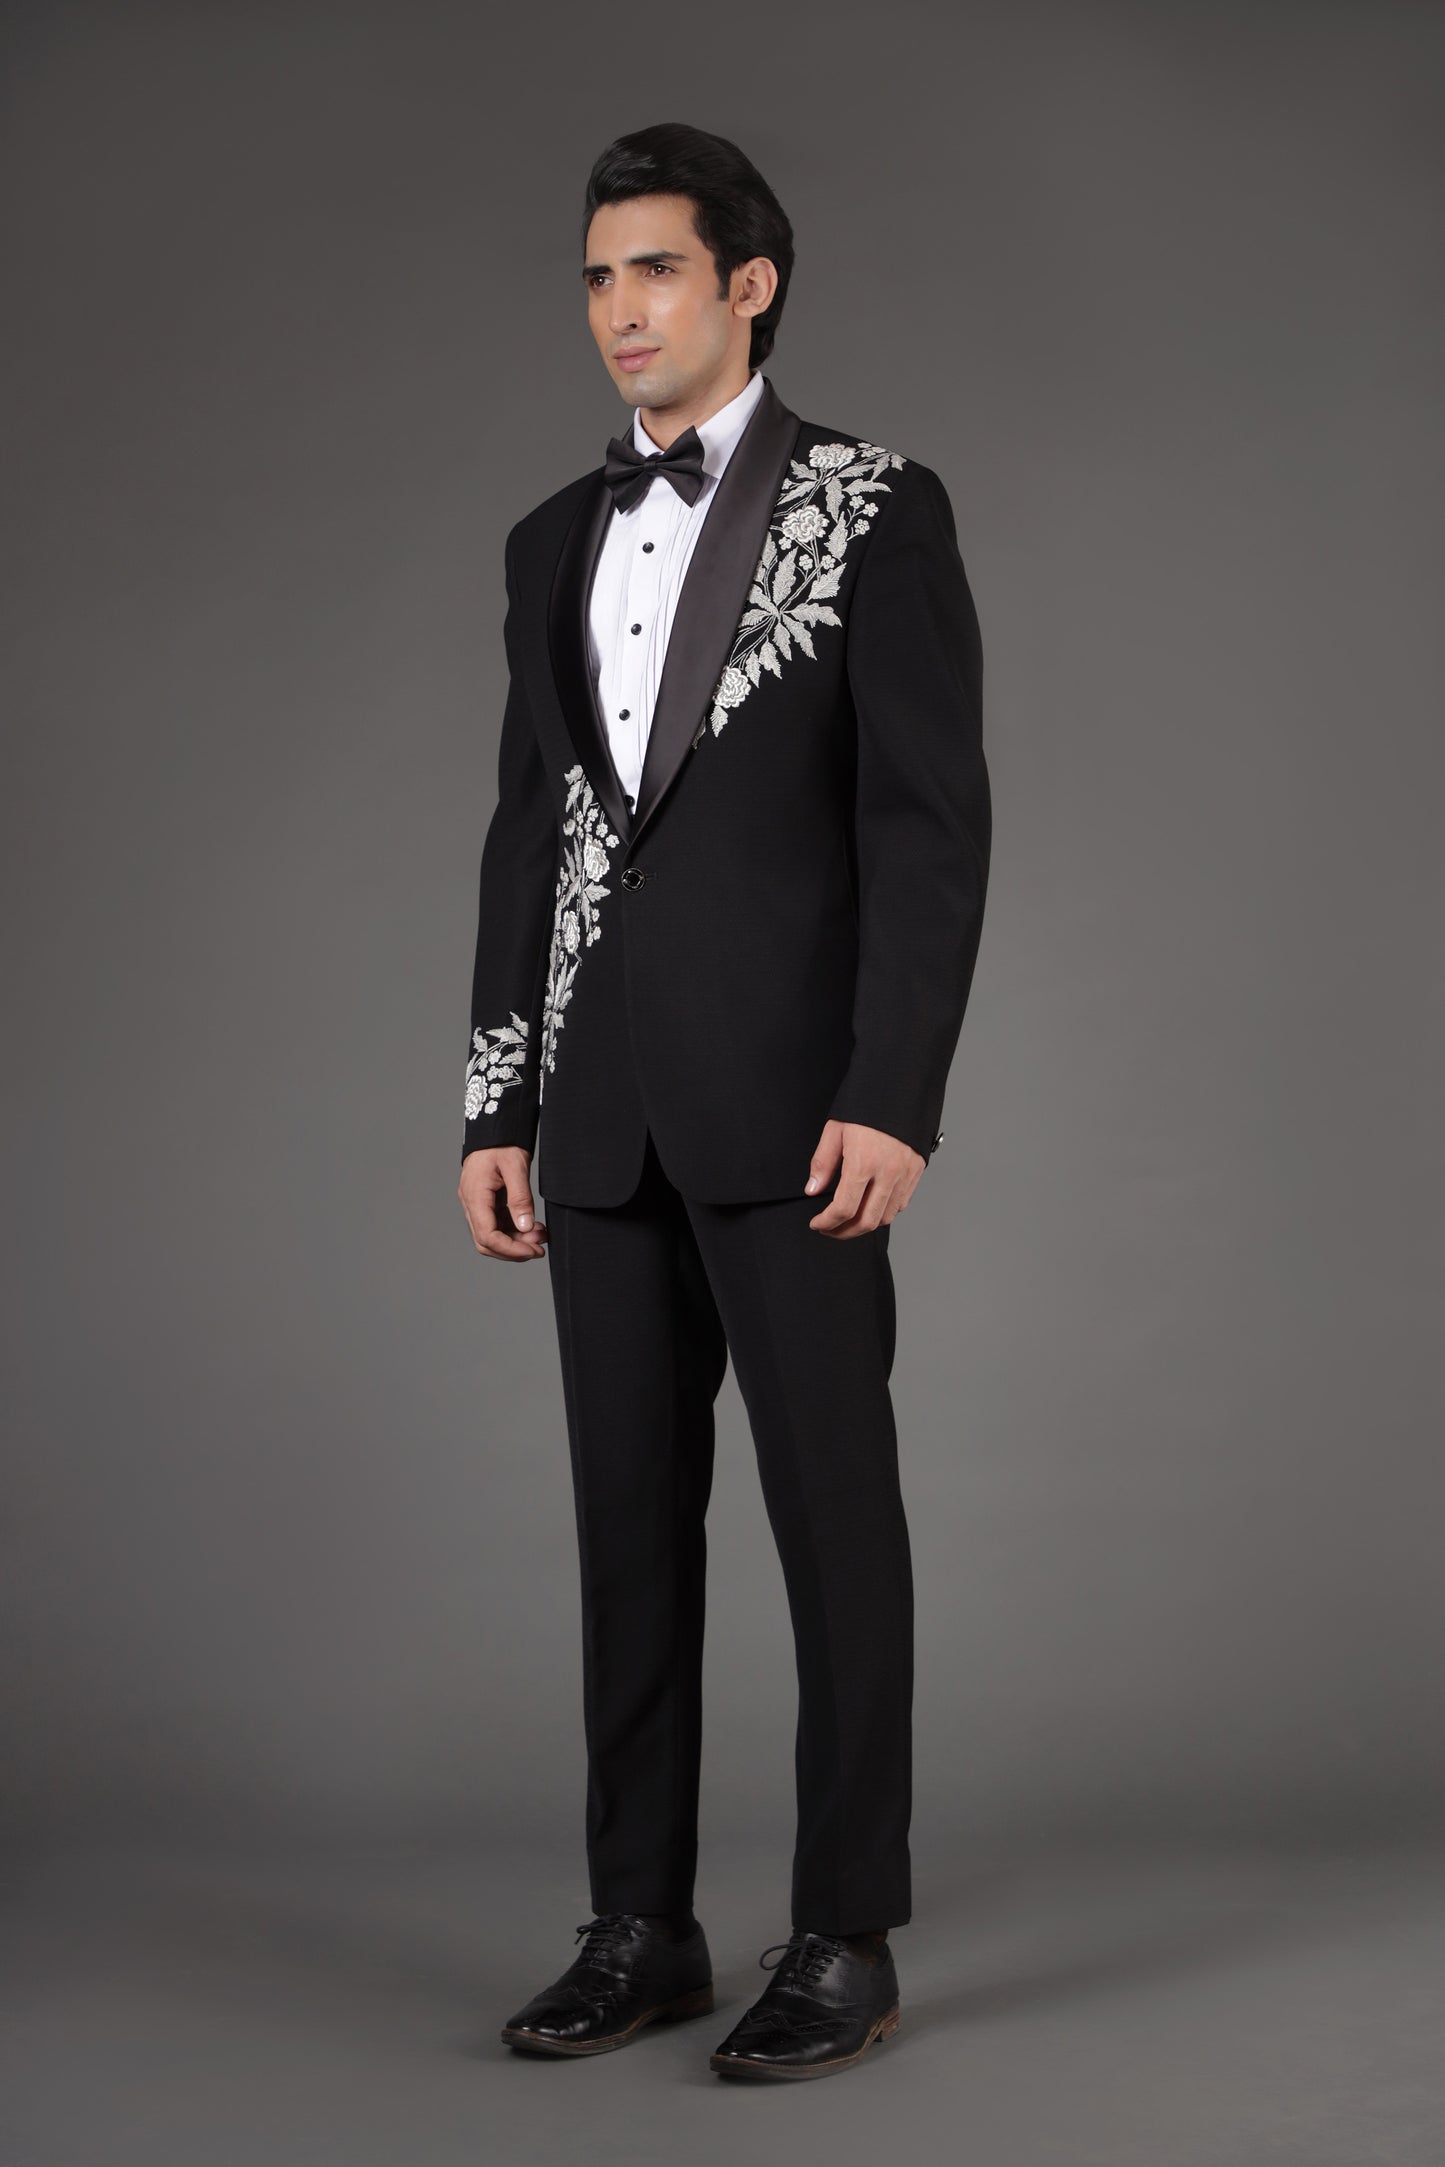 Pitch Black Embroidered Tuxedo Suit